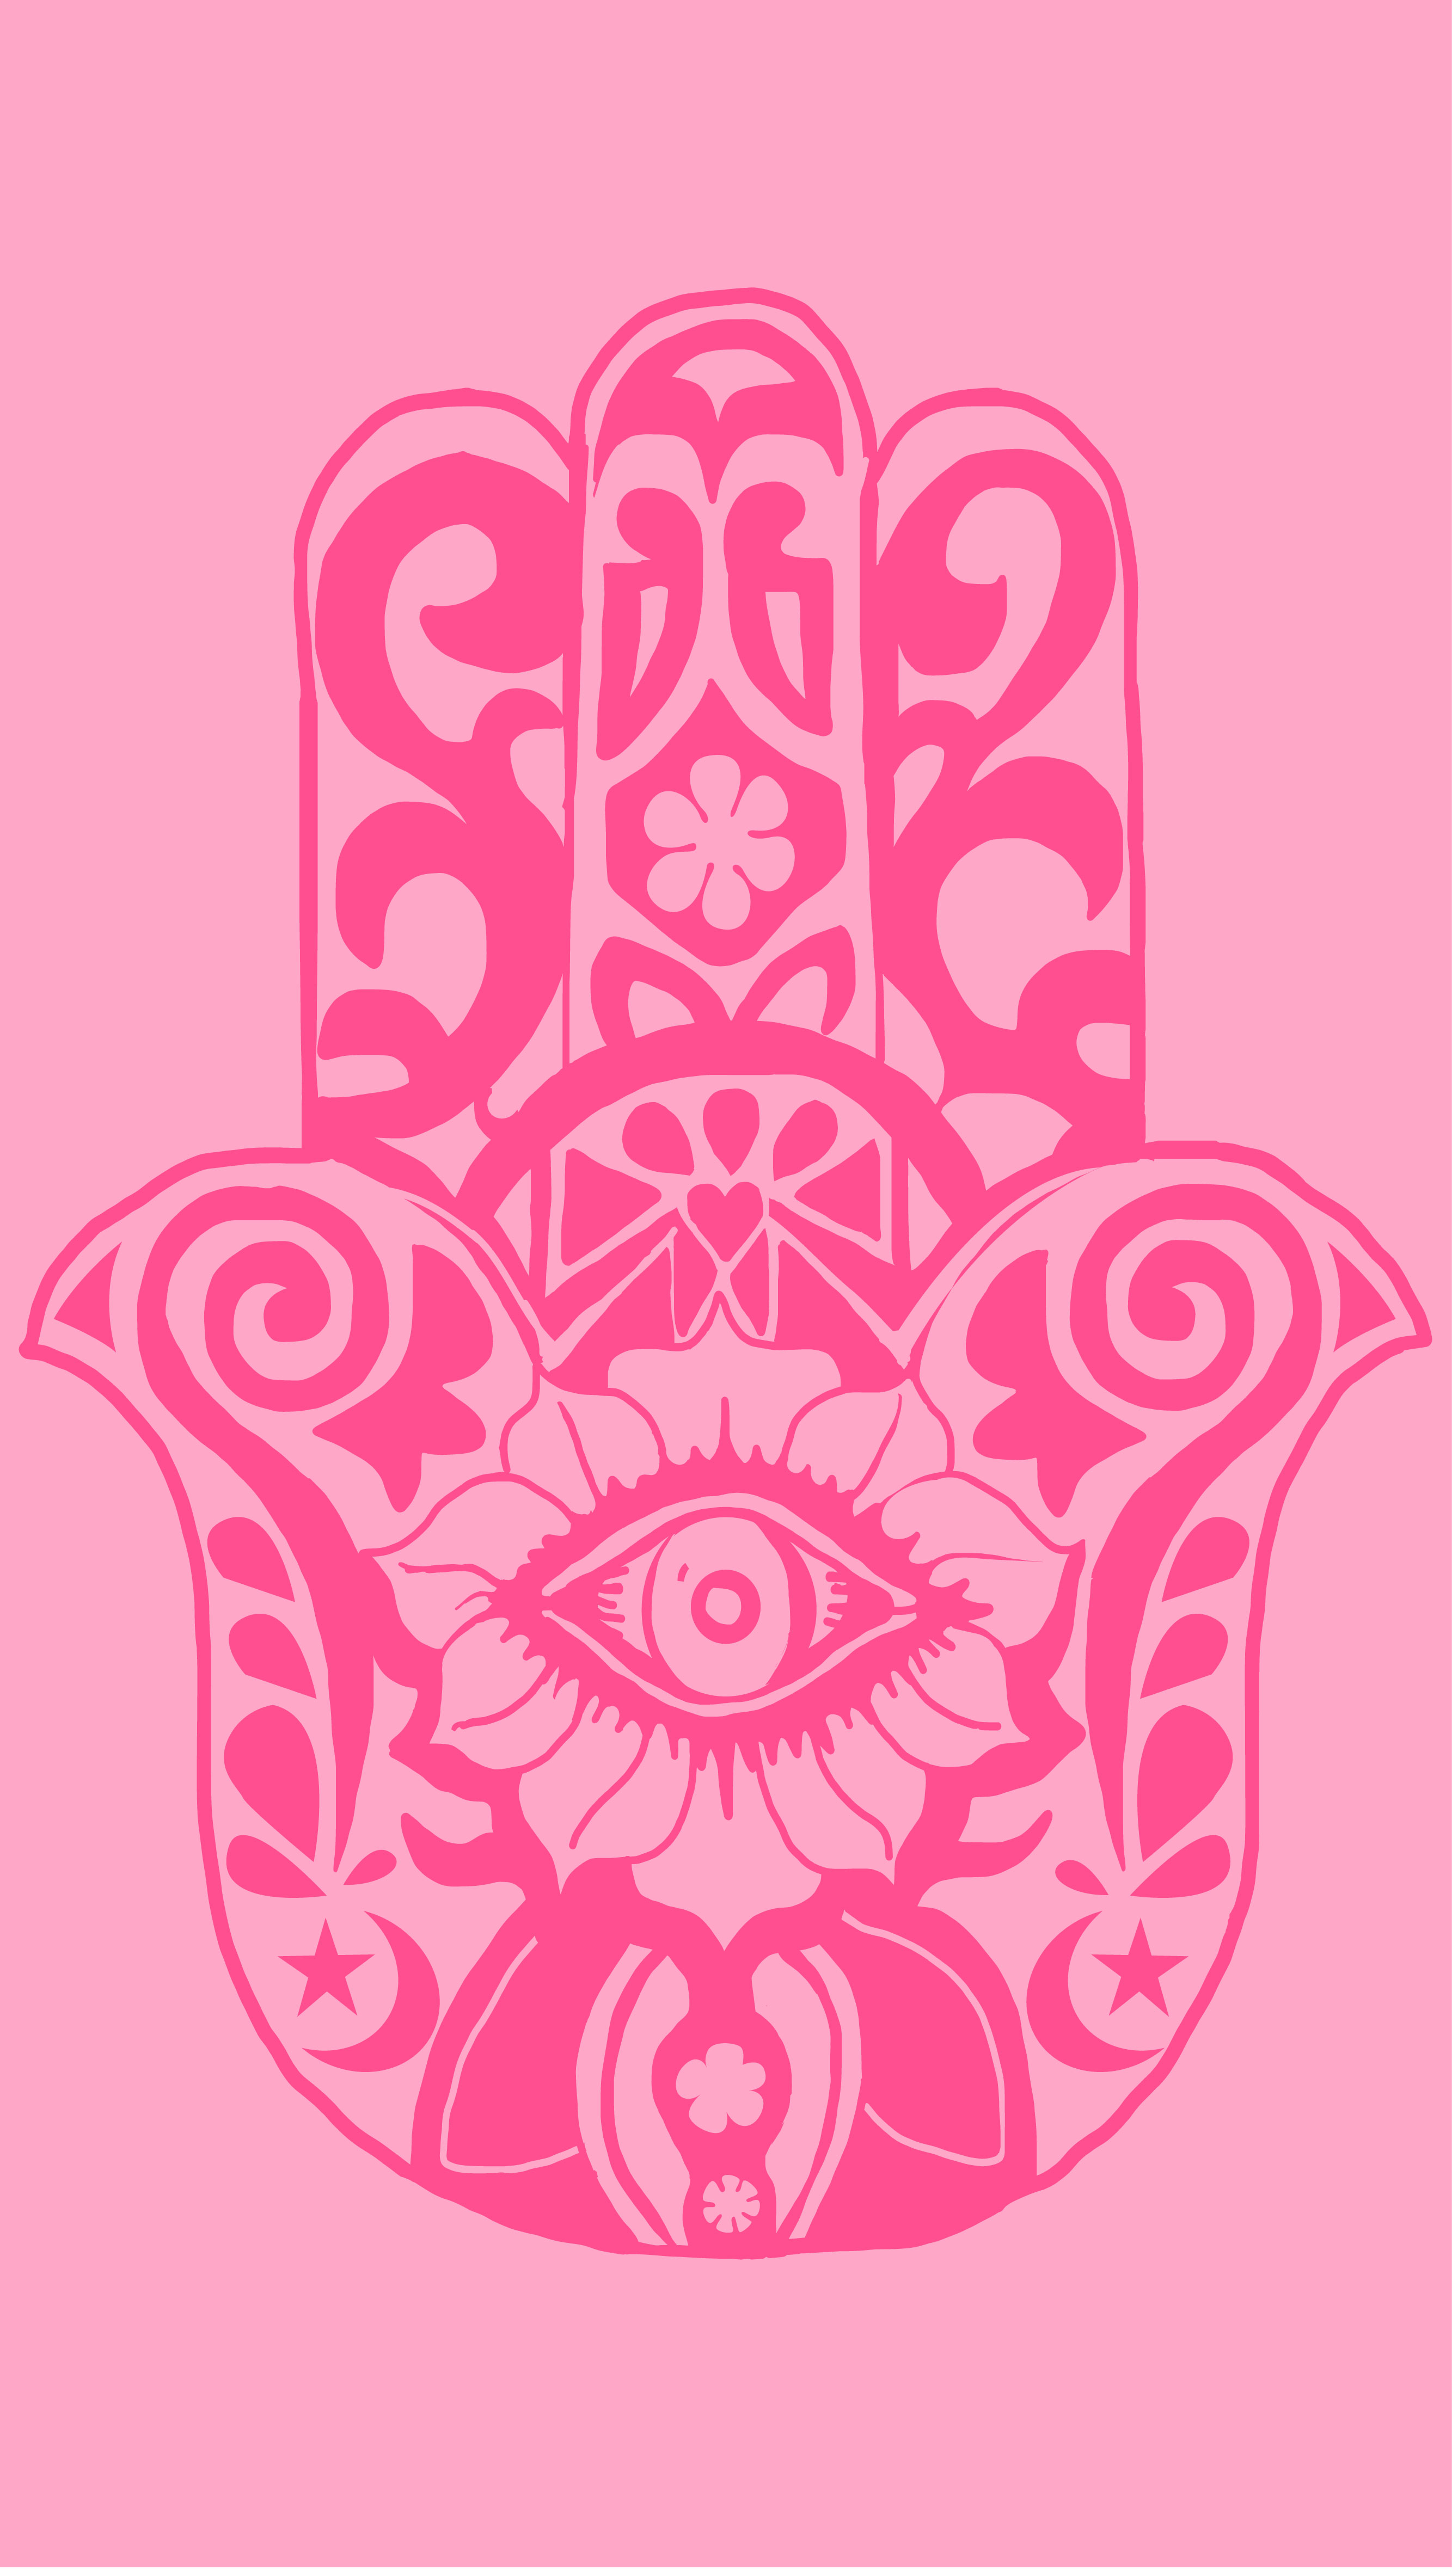 Pink Iphone 5S Wallpapers